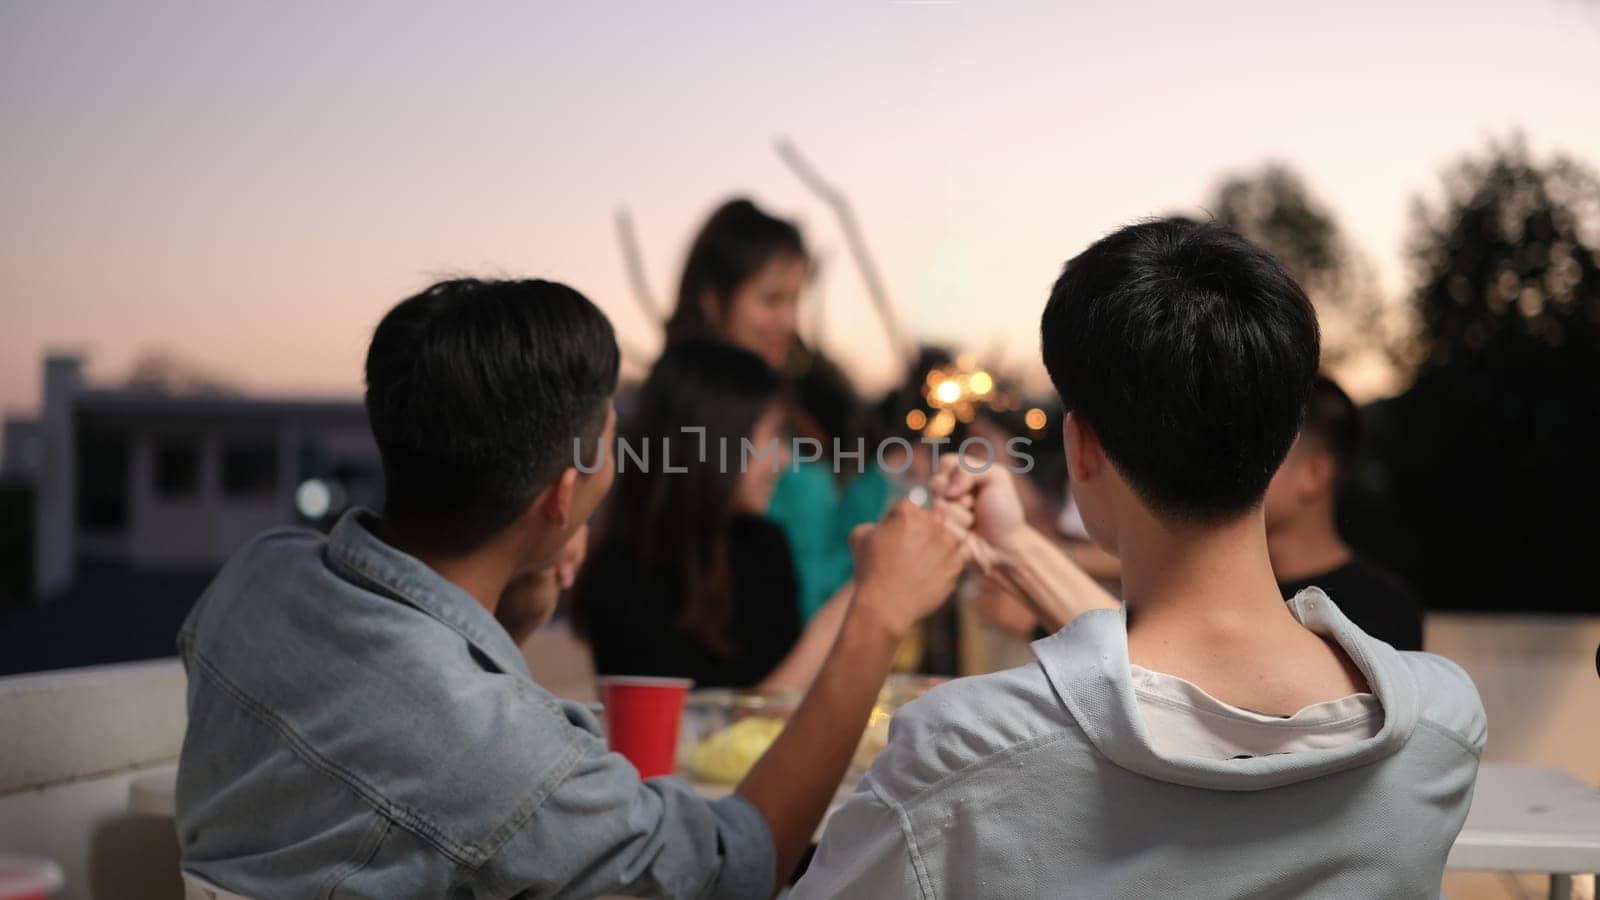 Group of friends taking and enjoying drinks during rooftop party at sunset